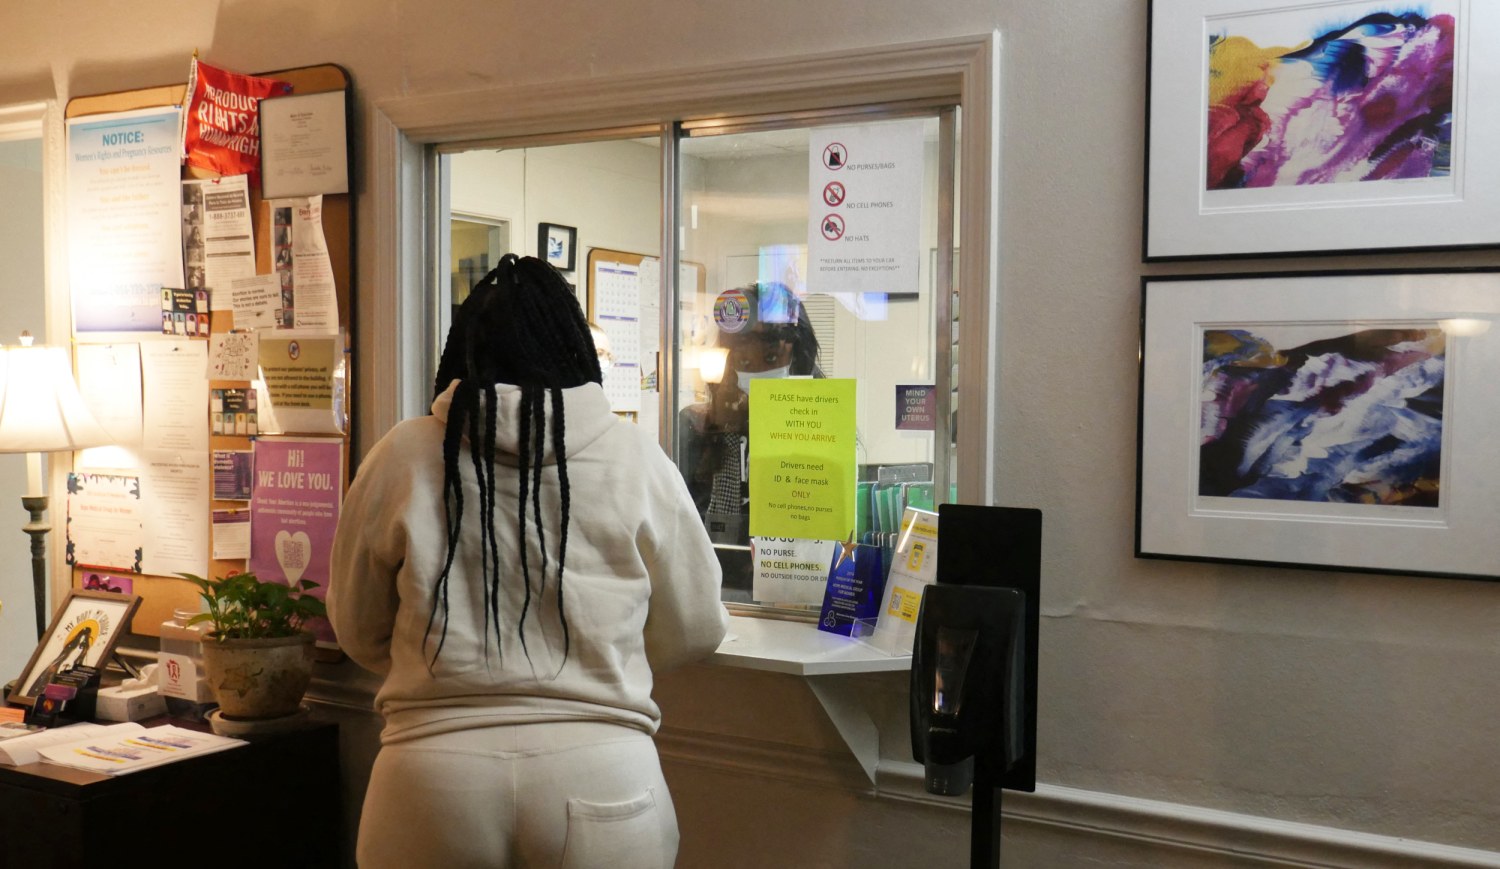 Black women are underserved when it comes to birth control access